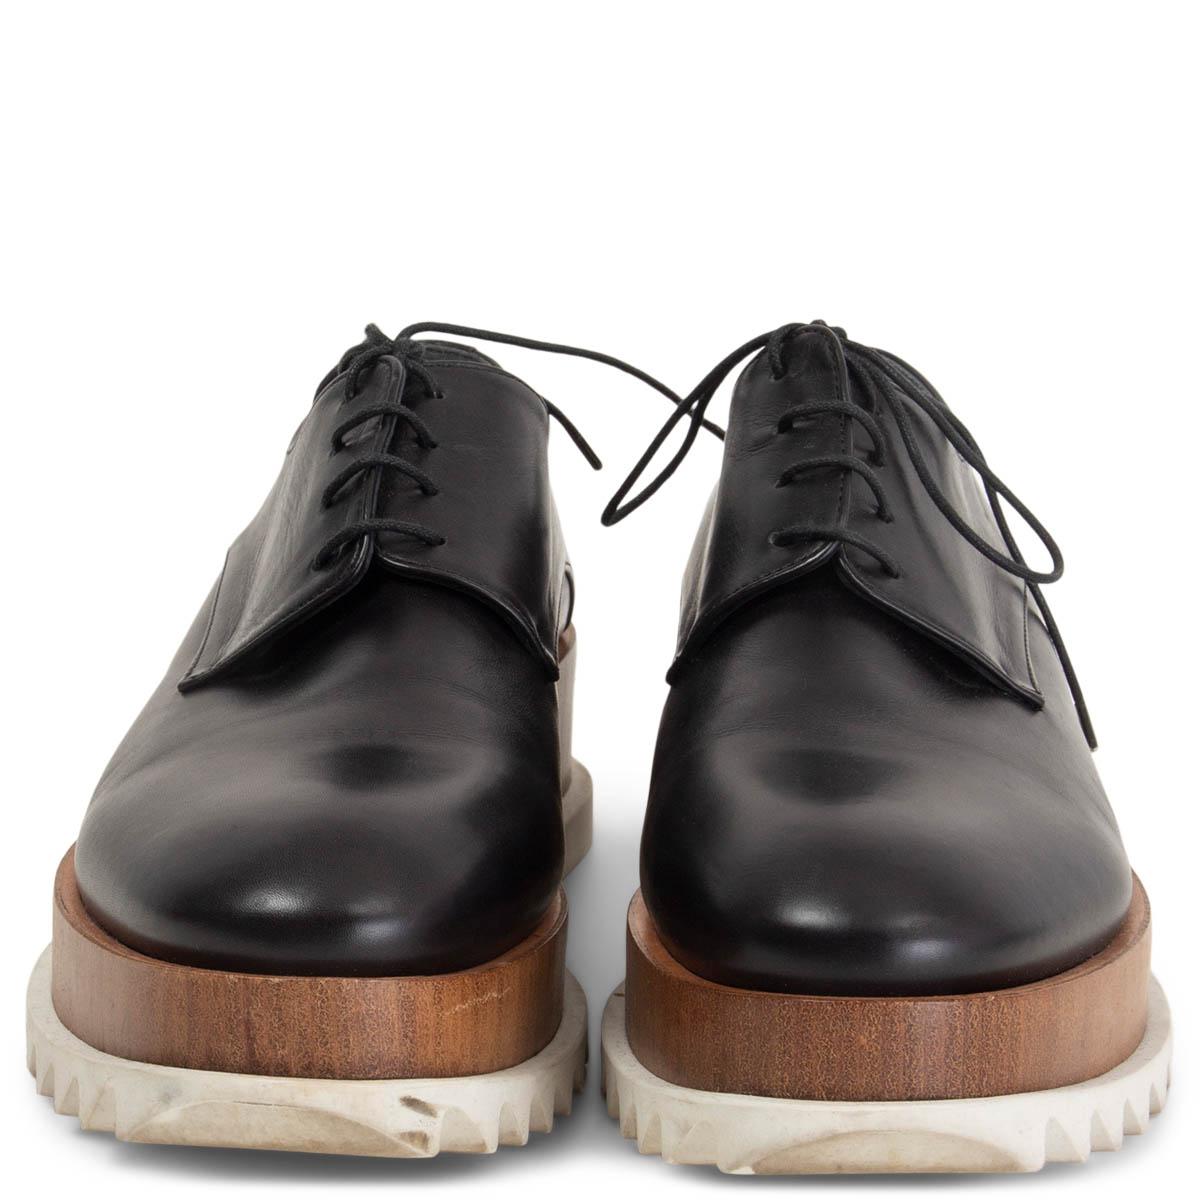 100% authentic Jil Sander lace-up derbys featuring a brown wooden platform with and saw-edged white rubber soles. Have been worn and are in excellent condition. 

Measurements
Imprinted Size	38
Shoe Size	38
Inside Sole	25cm (9.8in)
Width	7.5cm